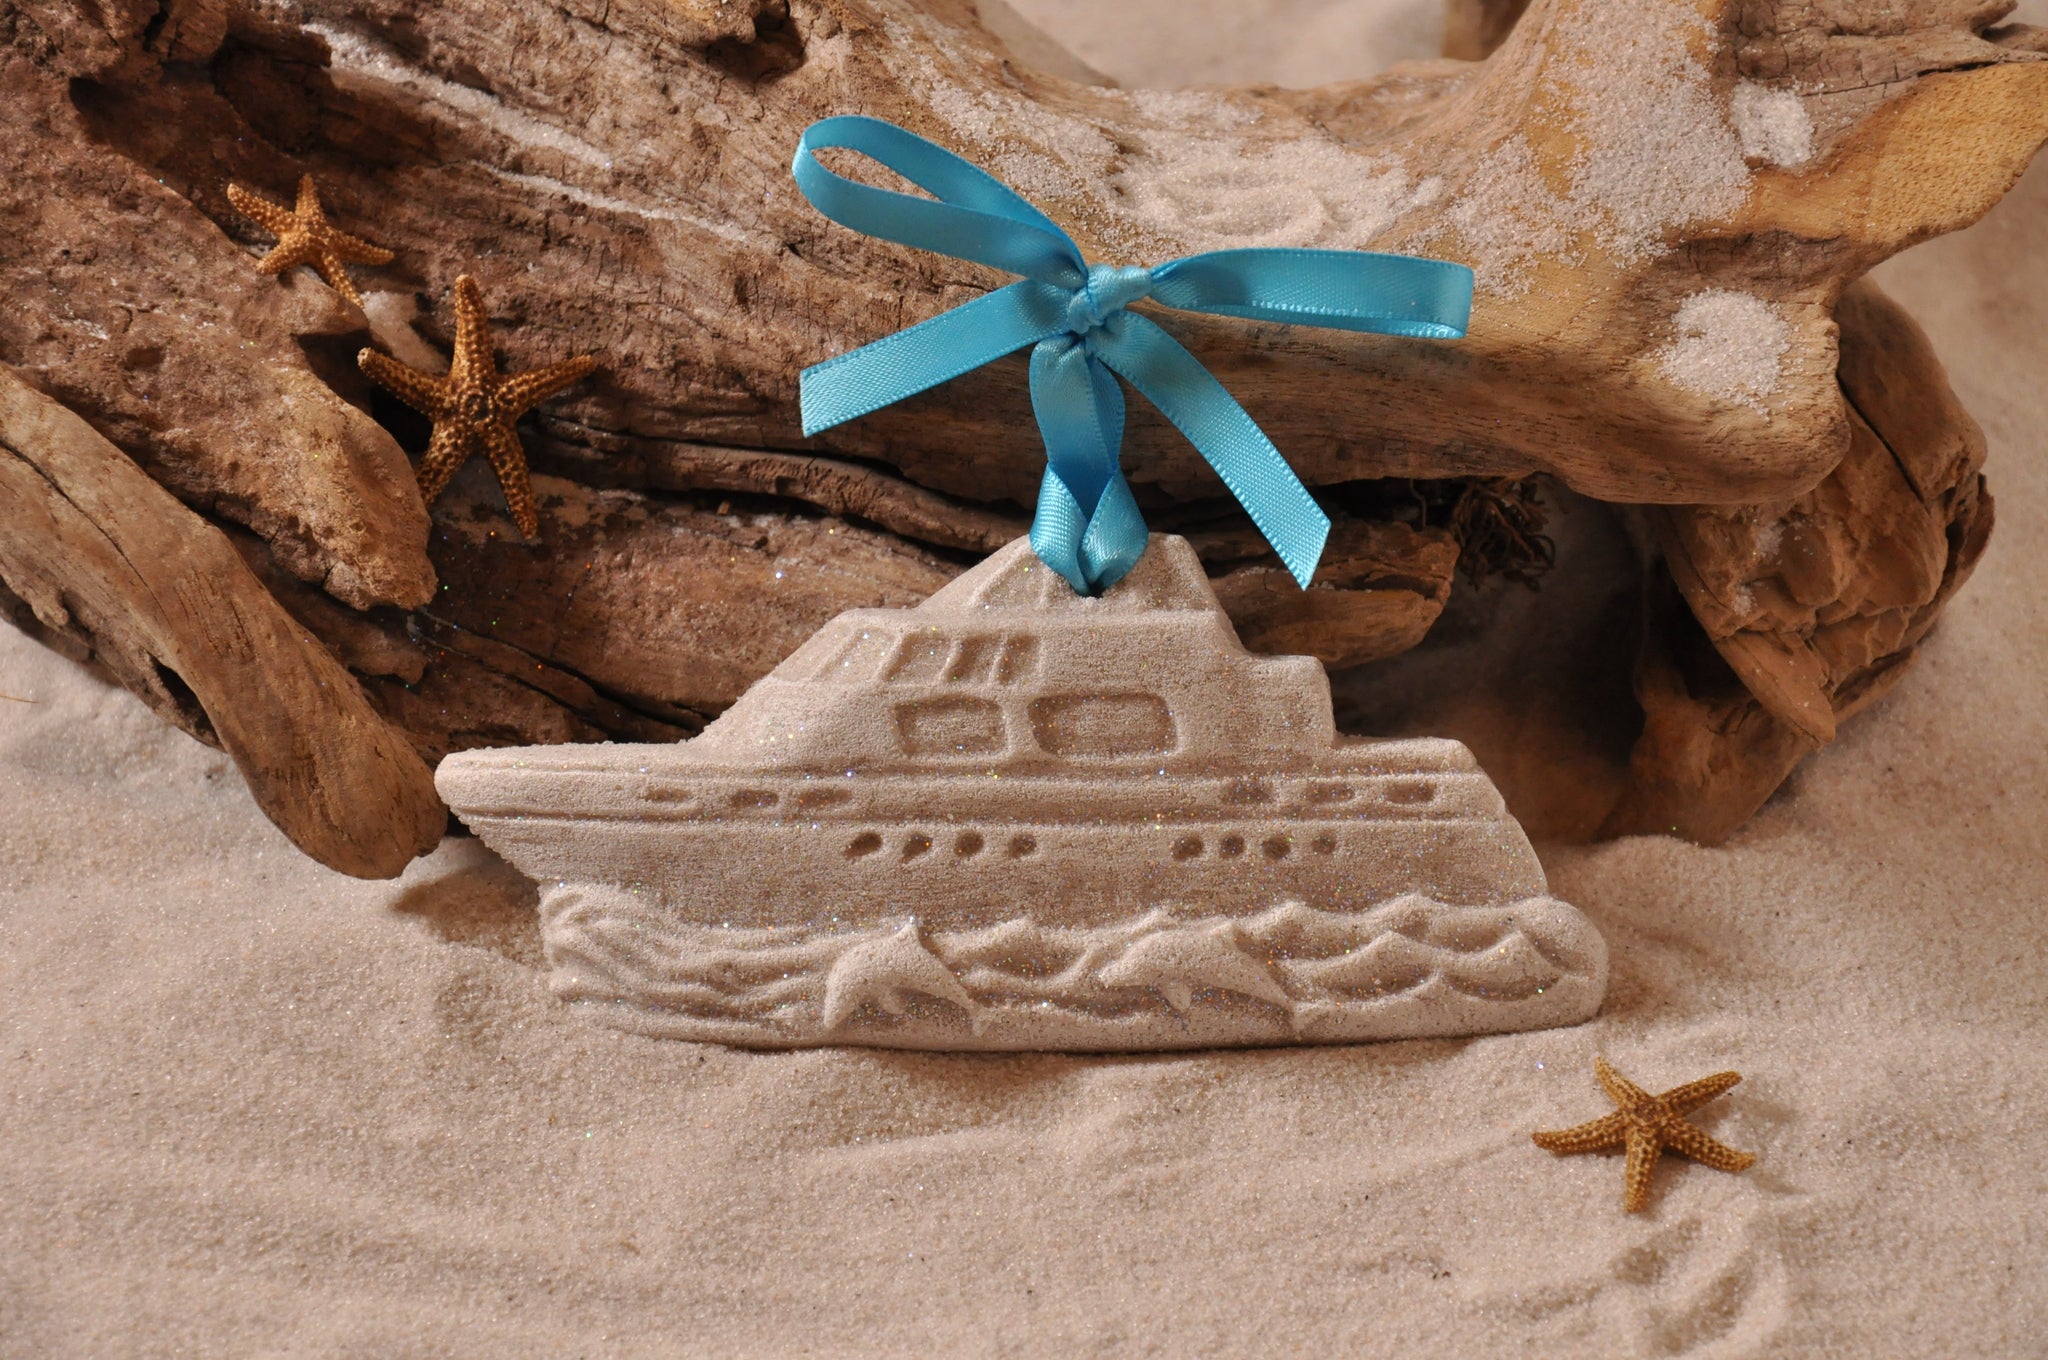 SAND ORNAMENT, CHRISTMAS TREE ORNAMENT, TROPICAL CHRISTMAS DECORATIONS, COASTAL ORNAMENT, SAND ORNAMENT, TROPICAL ORNAMENT, ARENOPHILE, SANTA, CHRISTMAS ORNAMENT, BOAT, YACHT, DOLPHIN